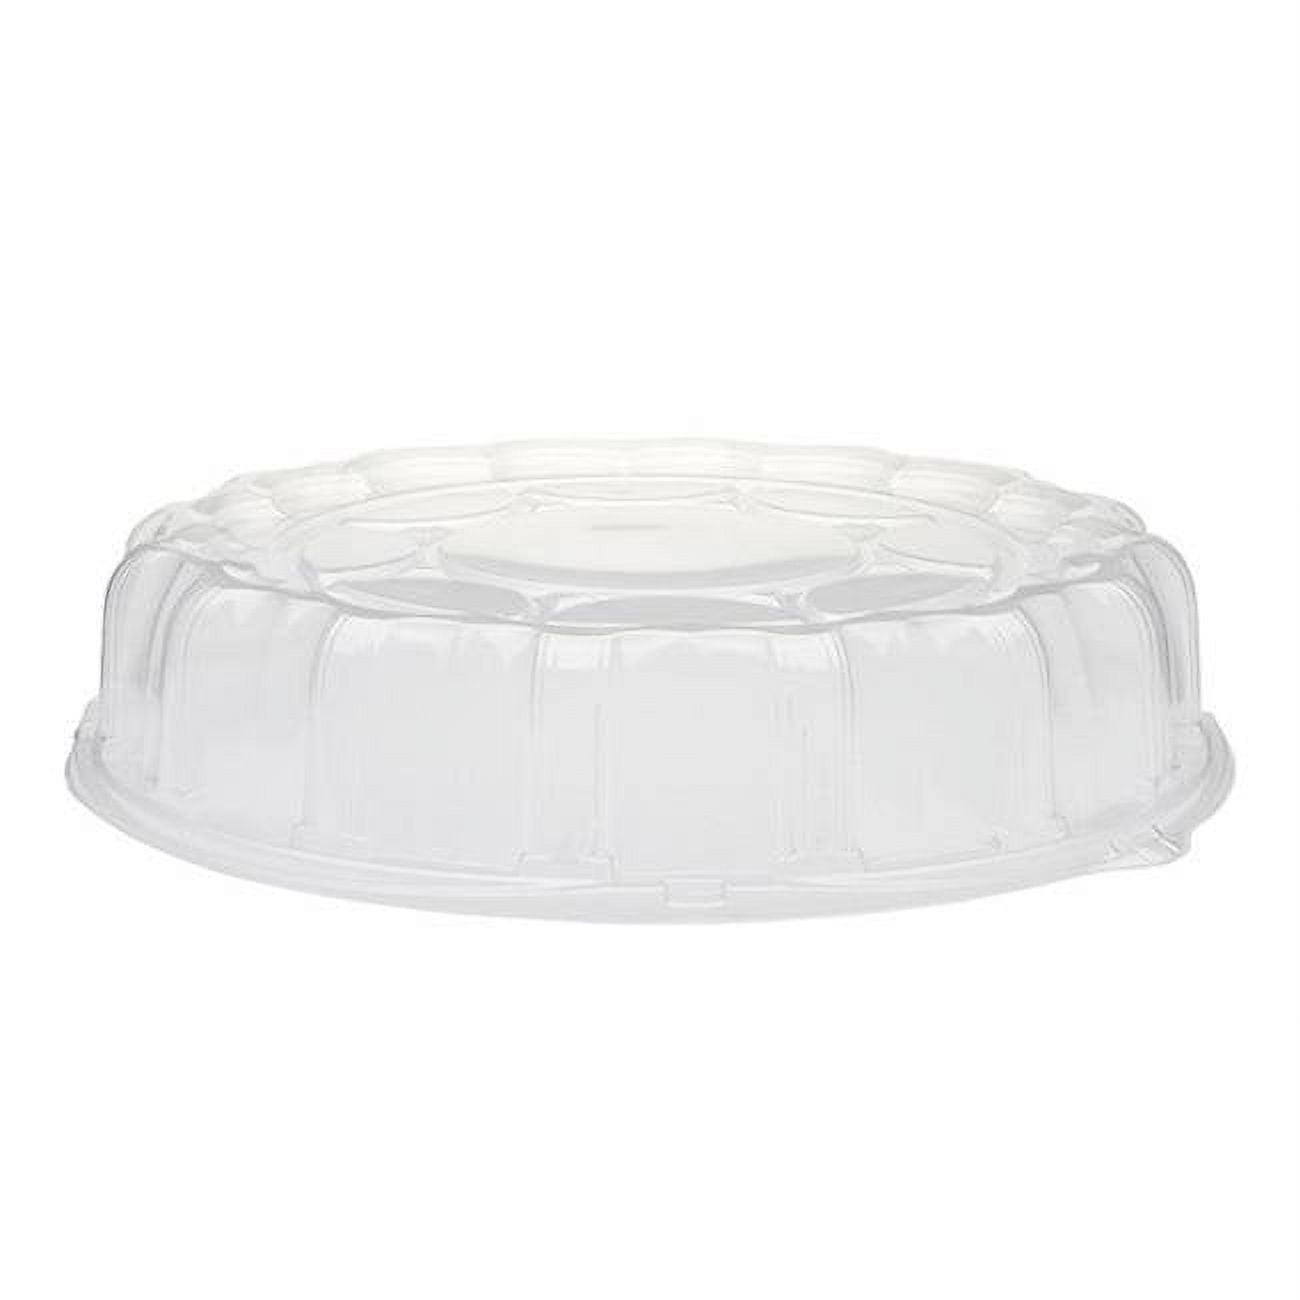 Pactiv Corporation P9816y Lid Catering Tray, Case Of 50 - 16 In.